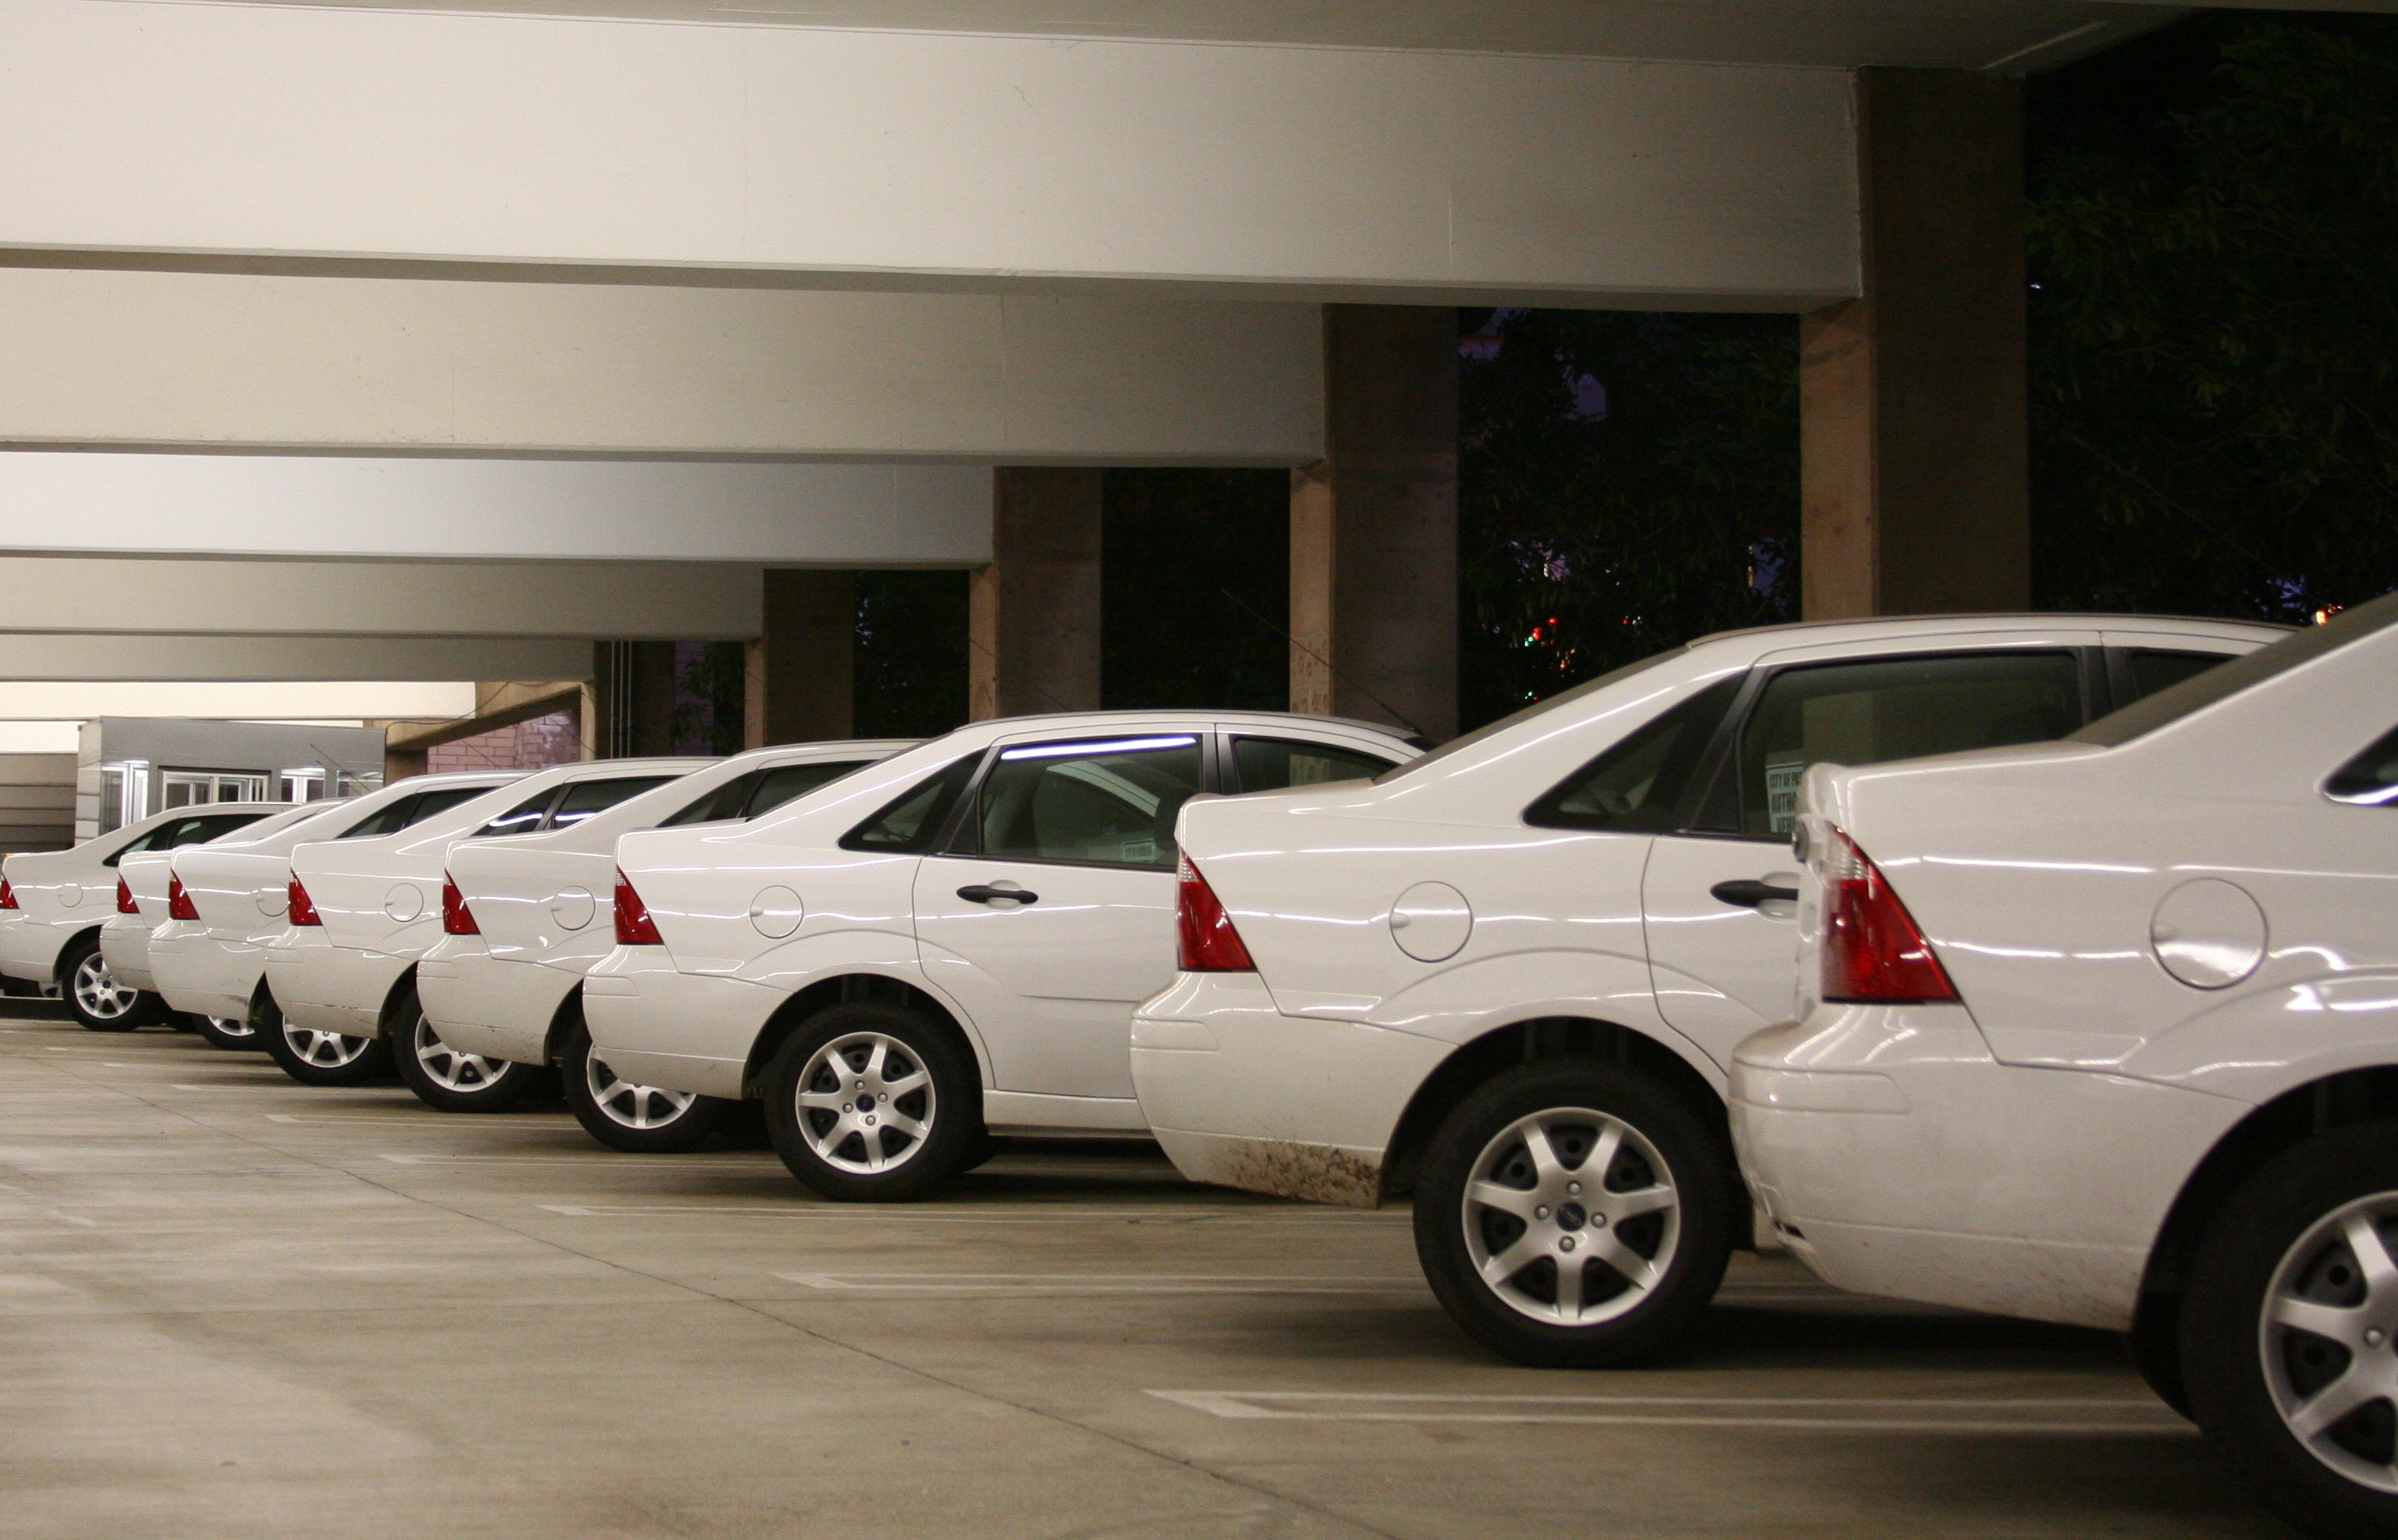 A row of white cars